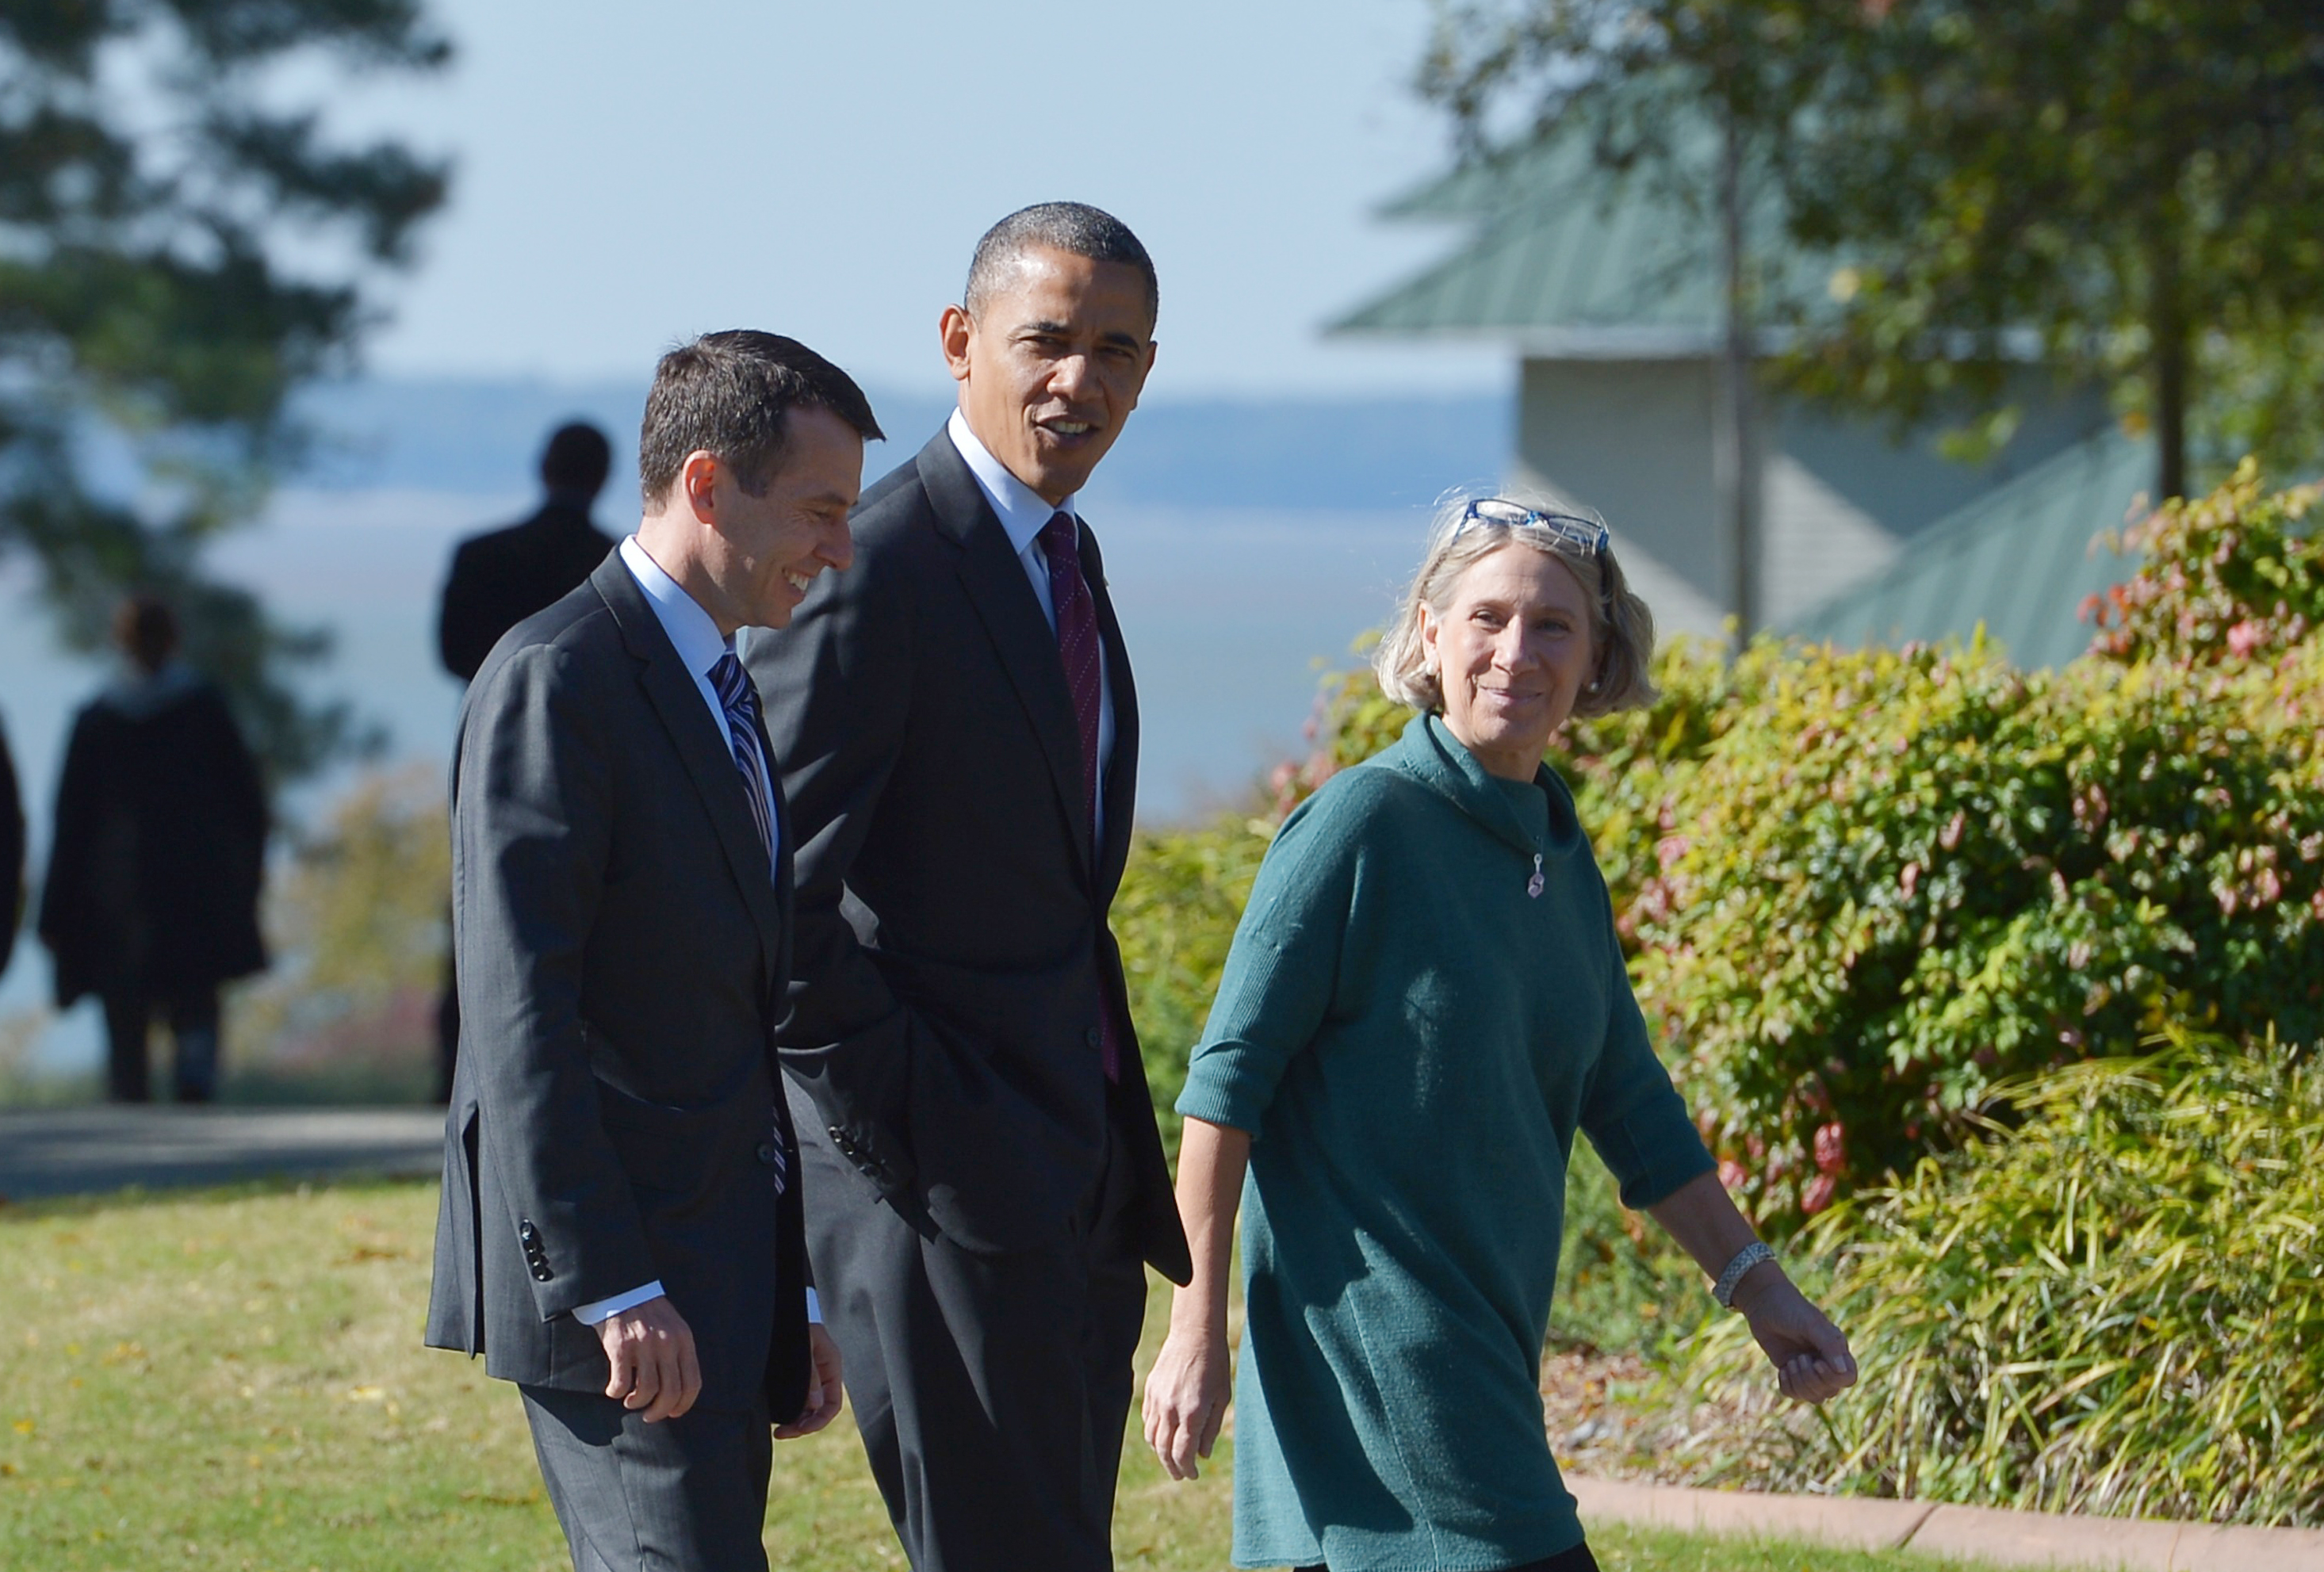 US President Barack Obama walks with Senior White House Advisor David Plouffe (L) and Anita Dunn to debate preparation at the Kingsmill Resort October 16, 2012 in Williamsburg, Virginia. Obama will be heading to to Hofstra University in Hempstead, New York later in the day for the second presidential debate. AFP PHOTO/Mandel NGAN (Photo credit should read MANDEL NGAN/AFP/Getty Images)